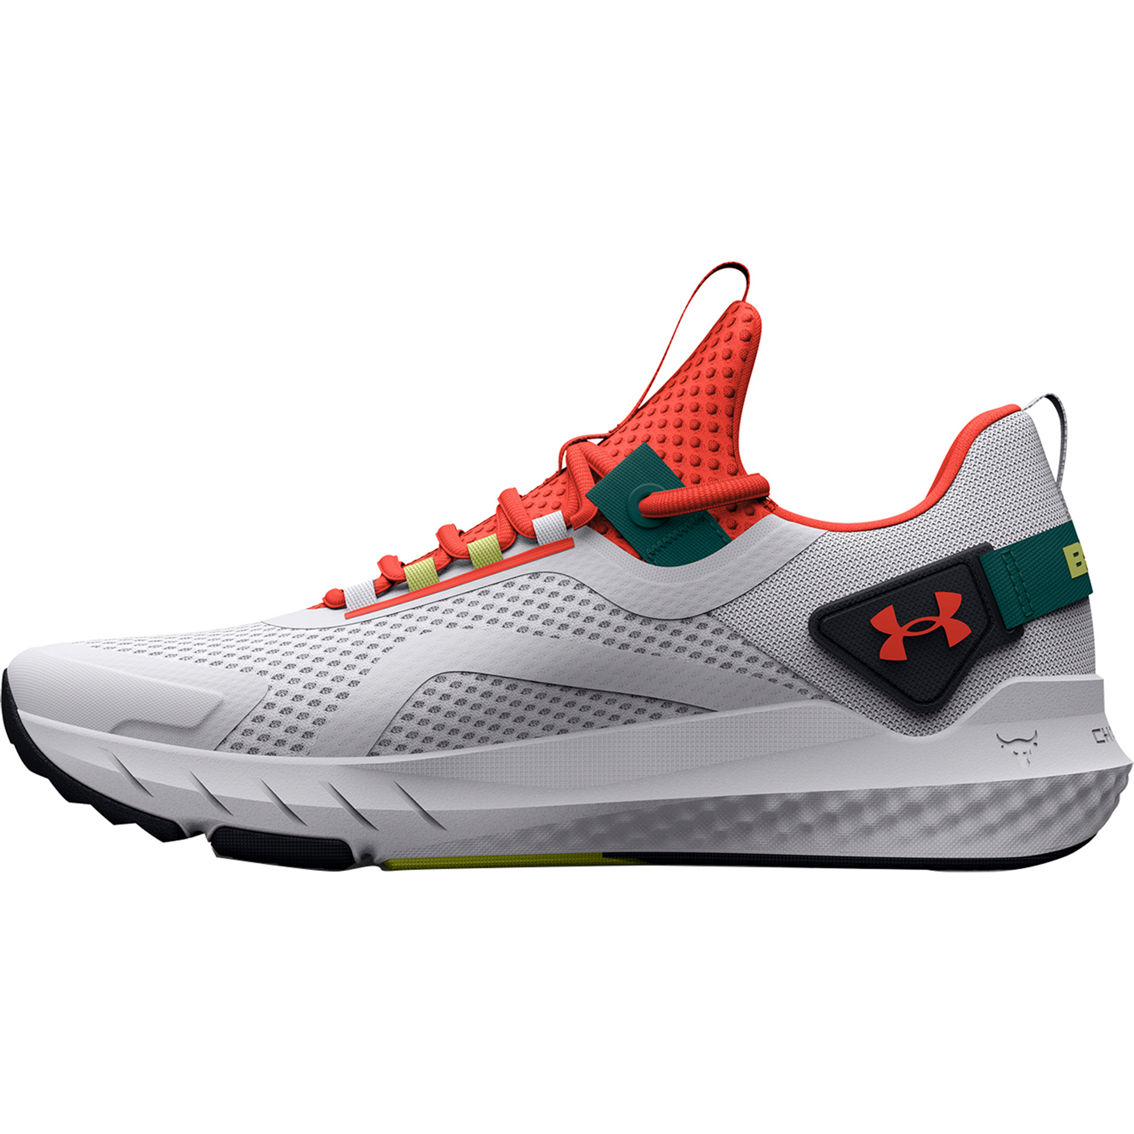 Under Armour Women's Project Rock Bsr 3 Training Shoes | Men's Athletic ...